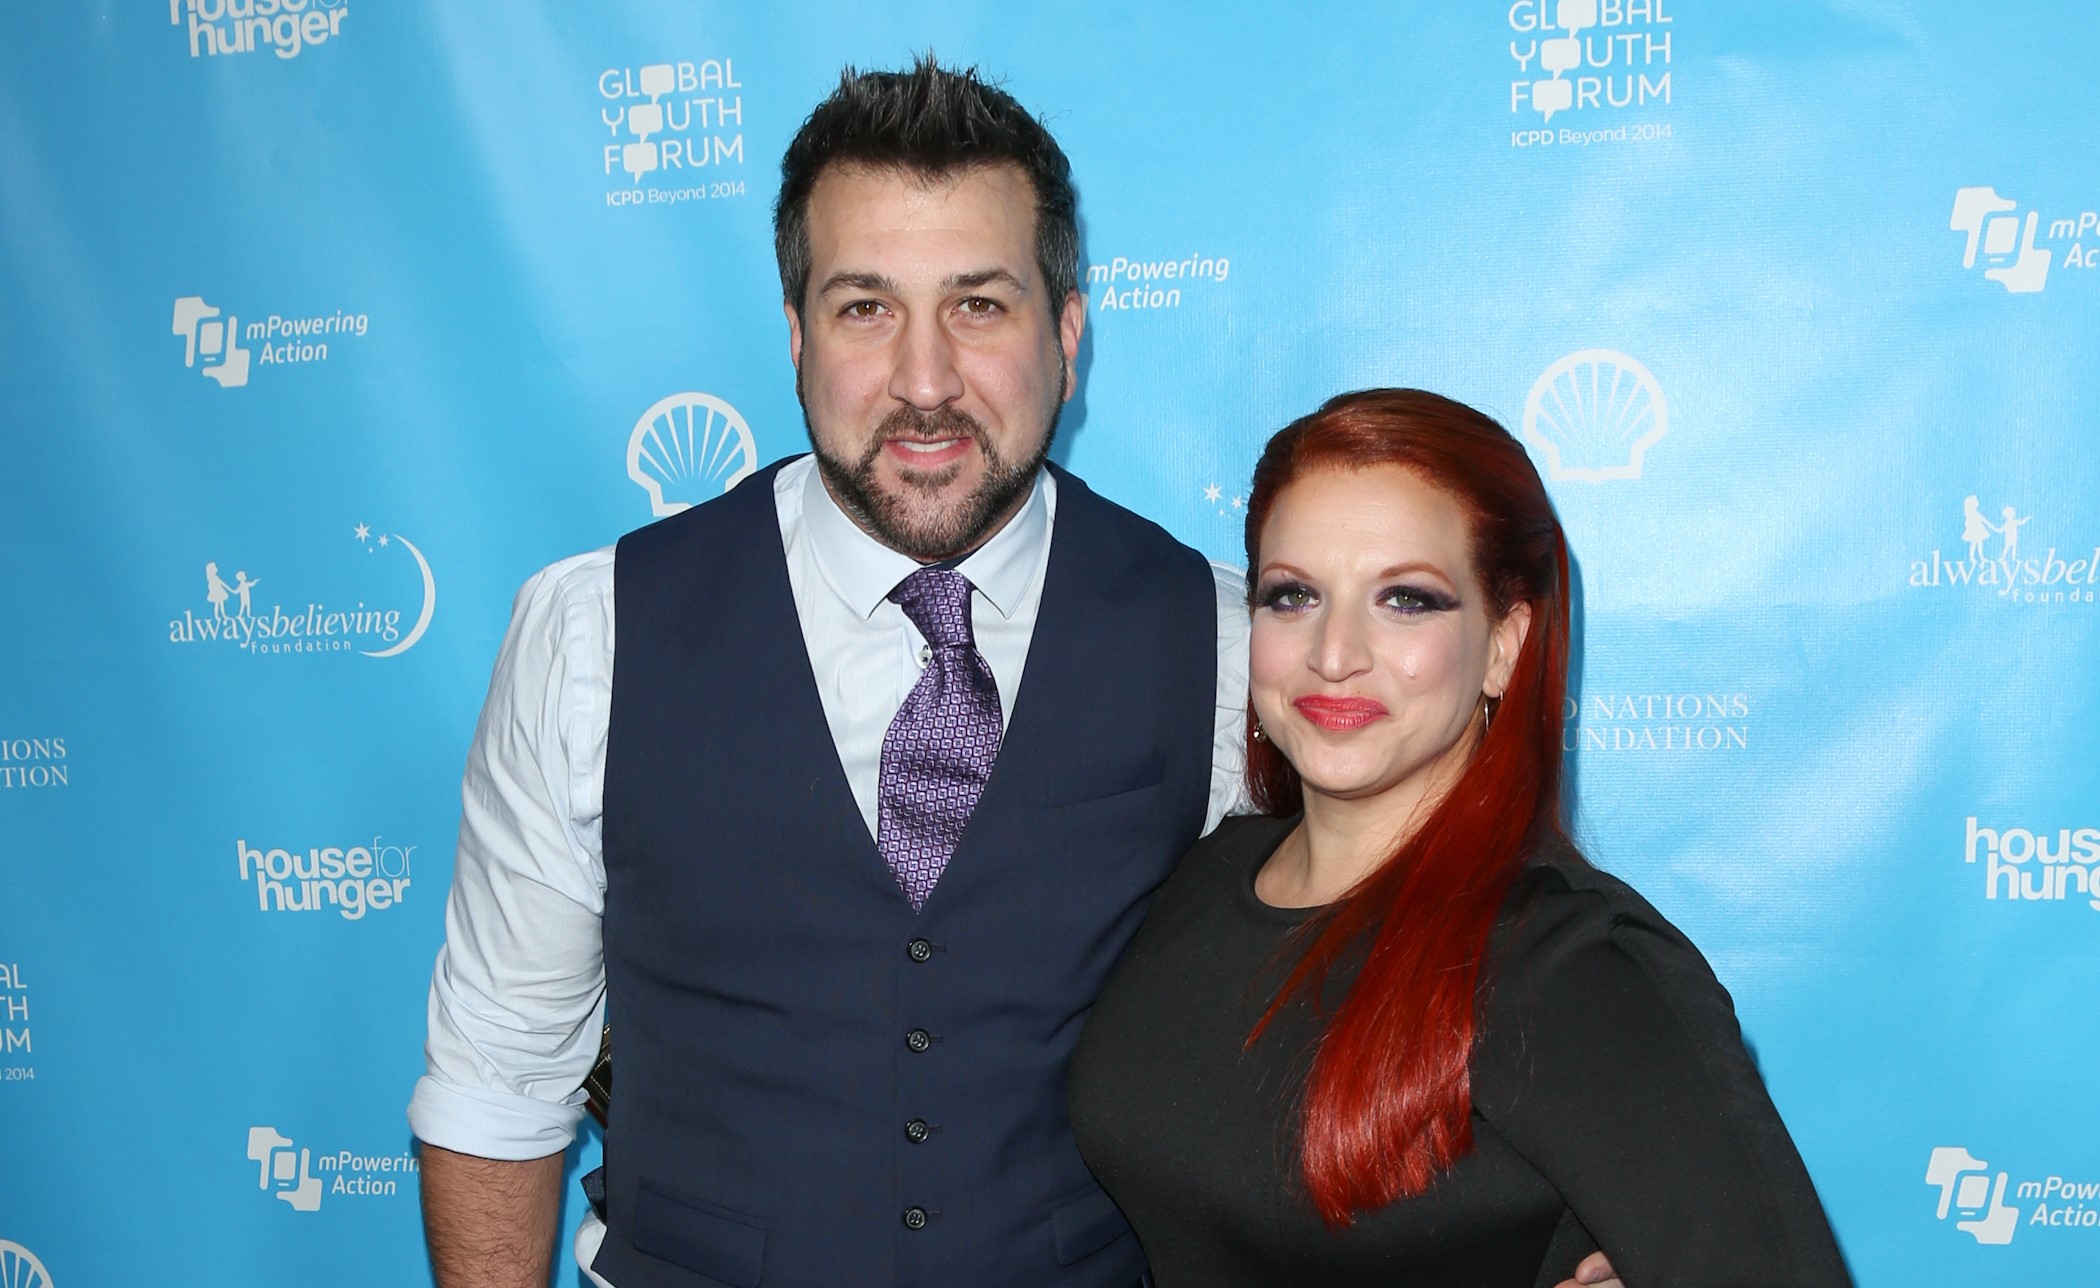 Producer Joey Fatone and writer Kelly Baldwin at the launch of mPowering Action at The Conga Room at L.A. Live, on February 8, 2013, in Los Angeles, California. | Source: Getty Images